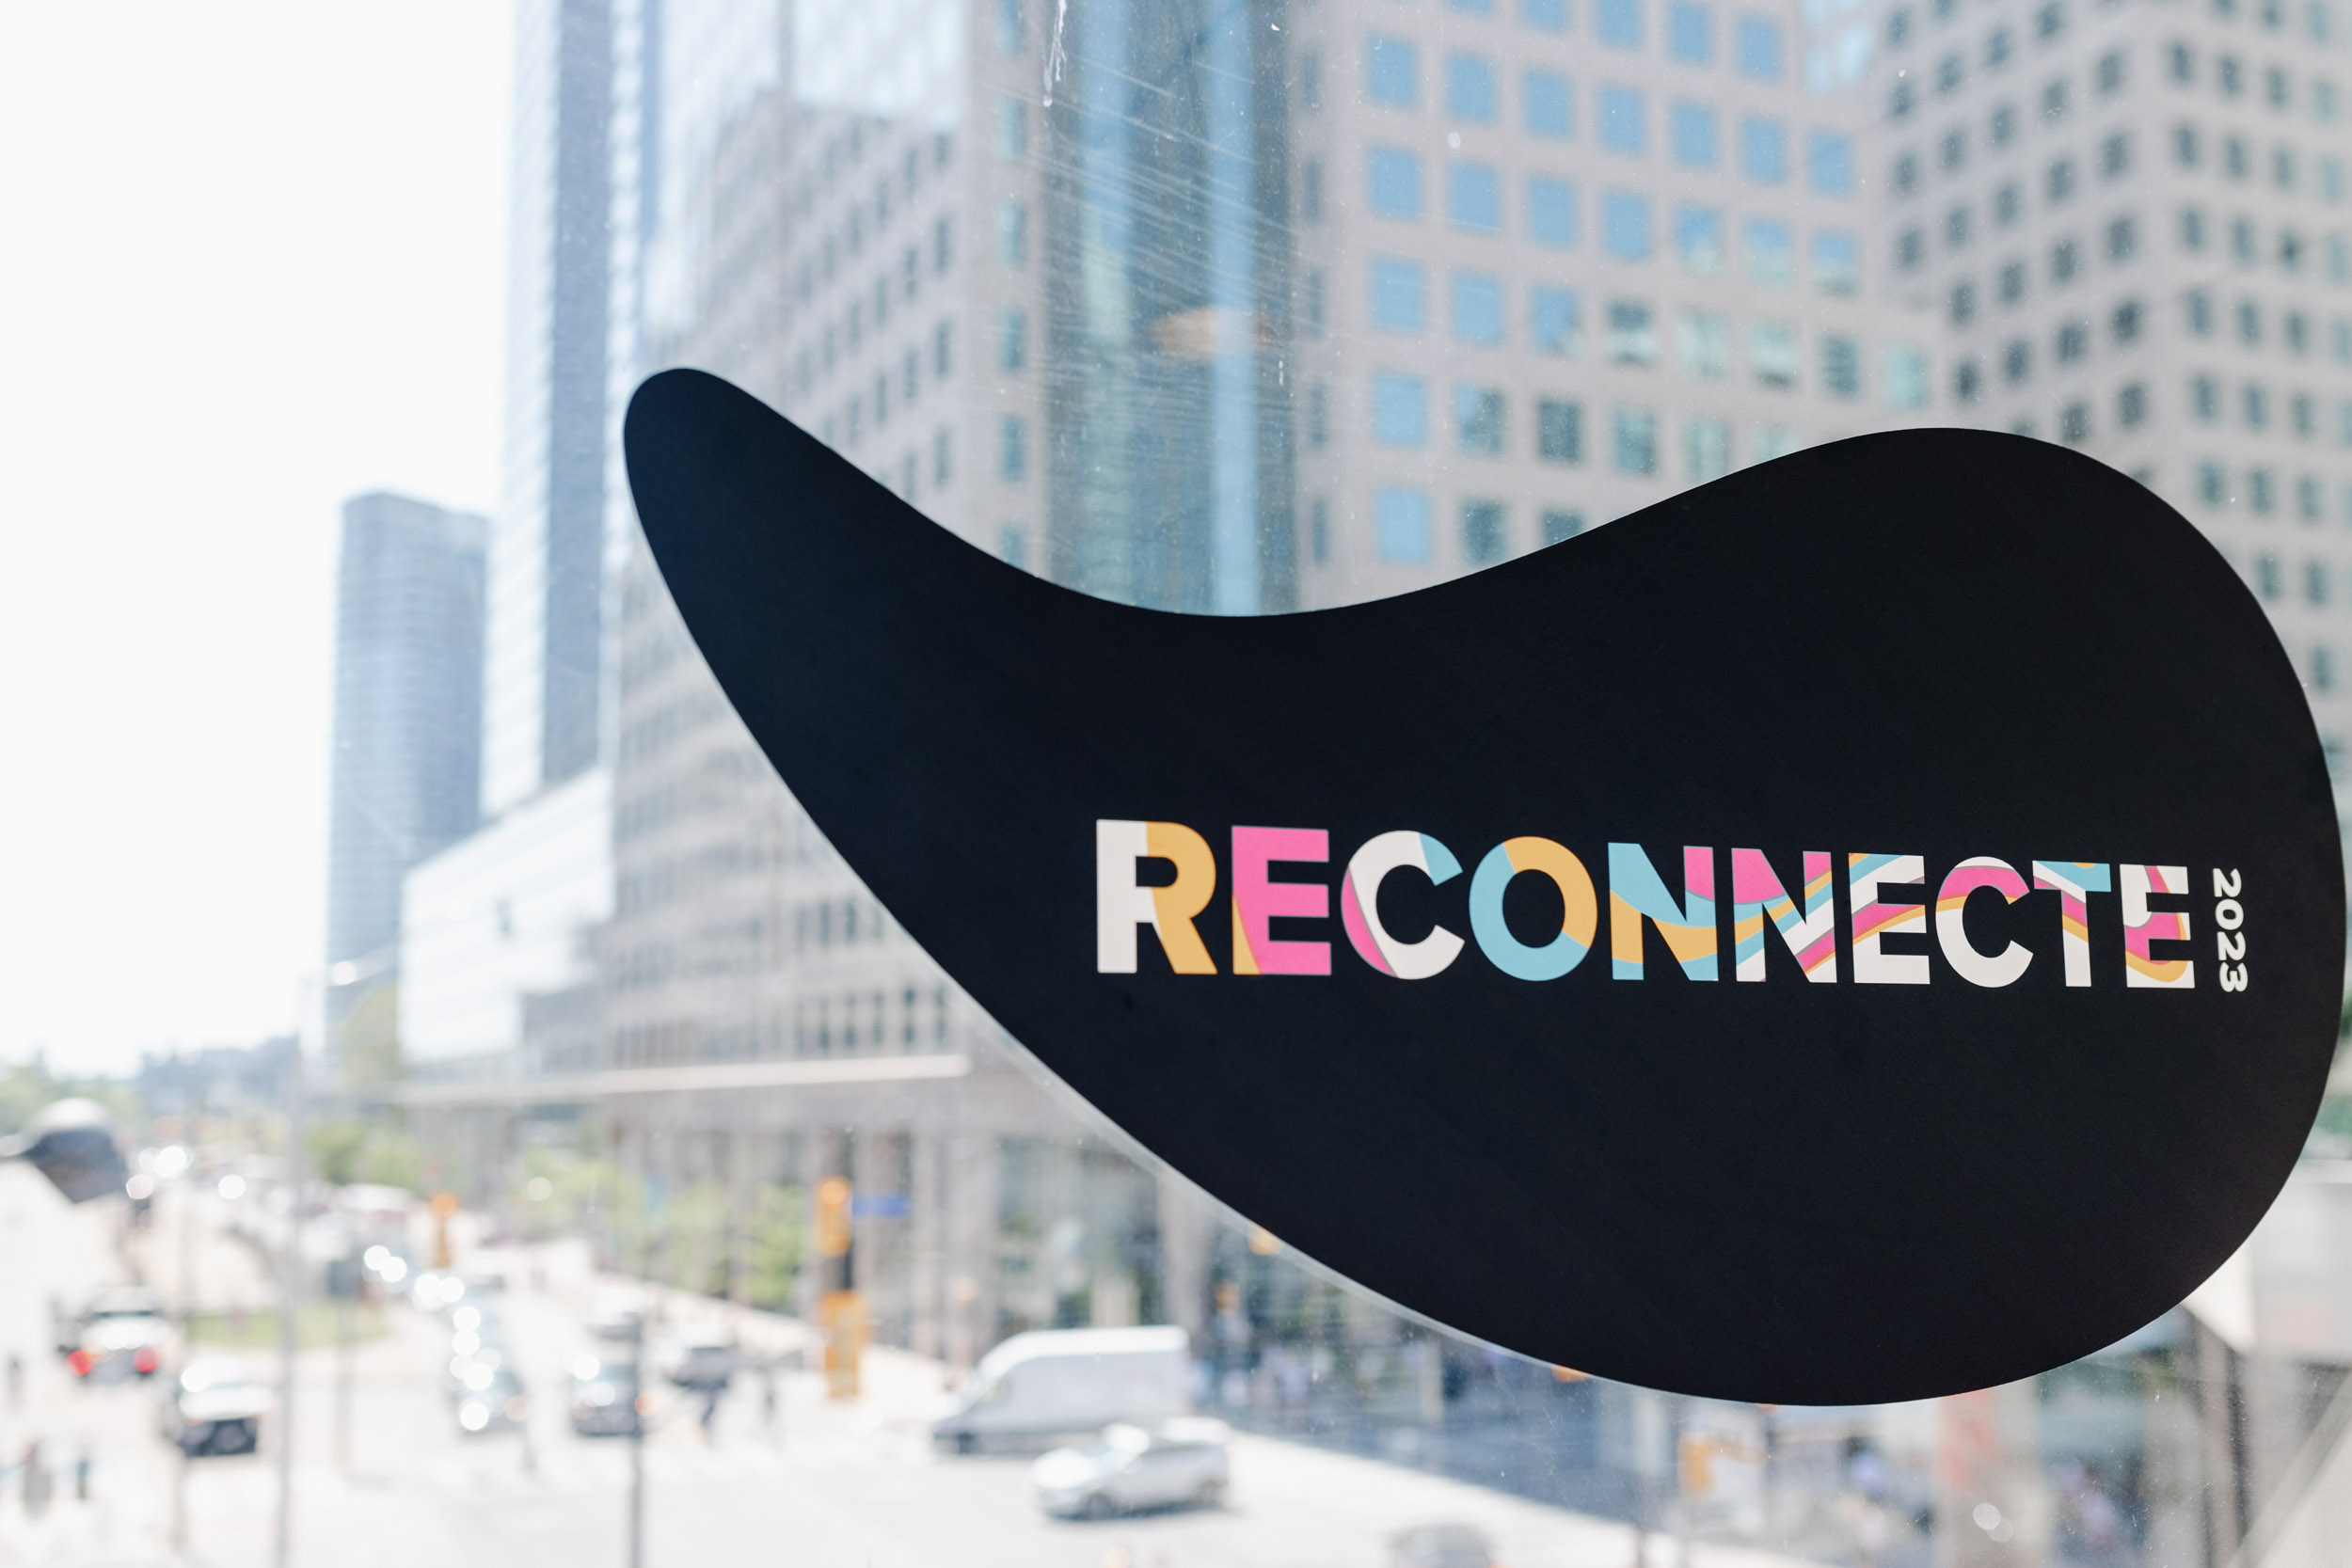 A conference building with the word "reconnect" sign.